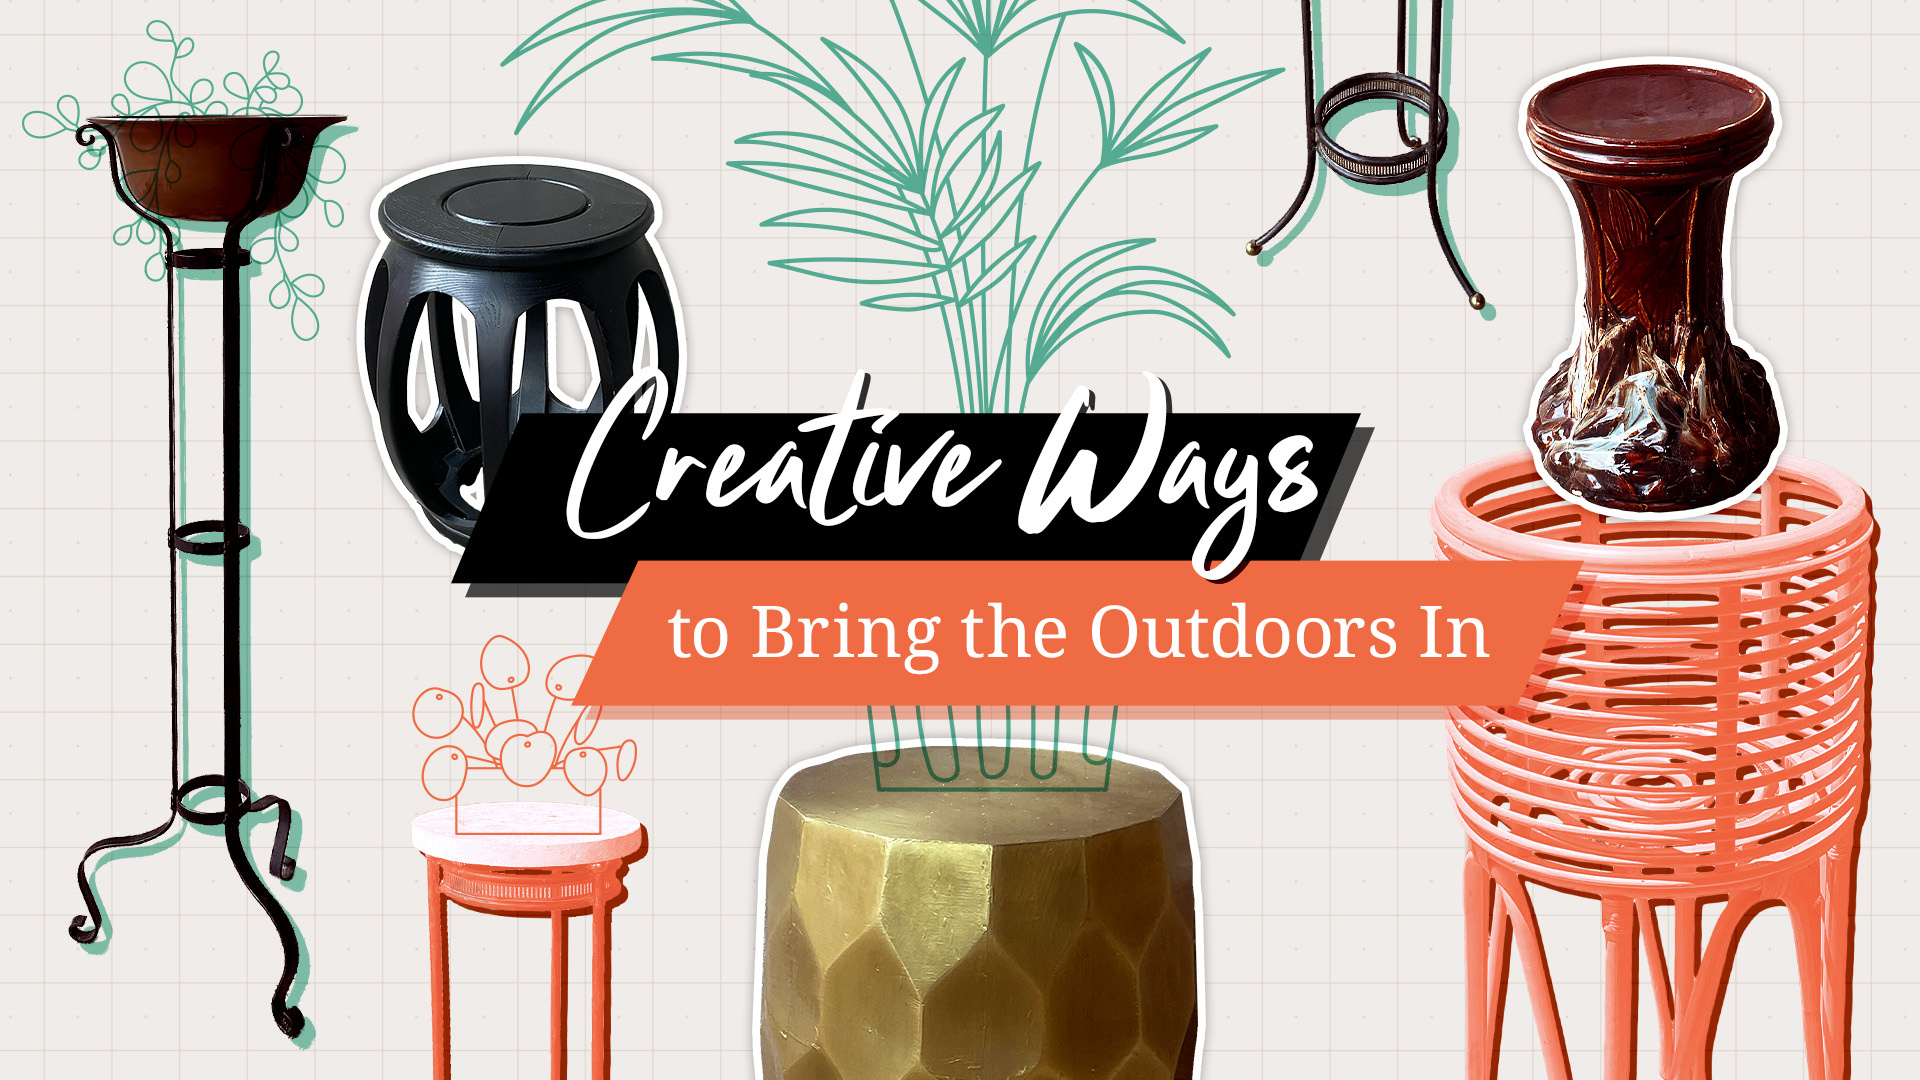 Creative Ways to Bring the Outdoors In